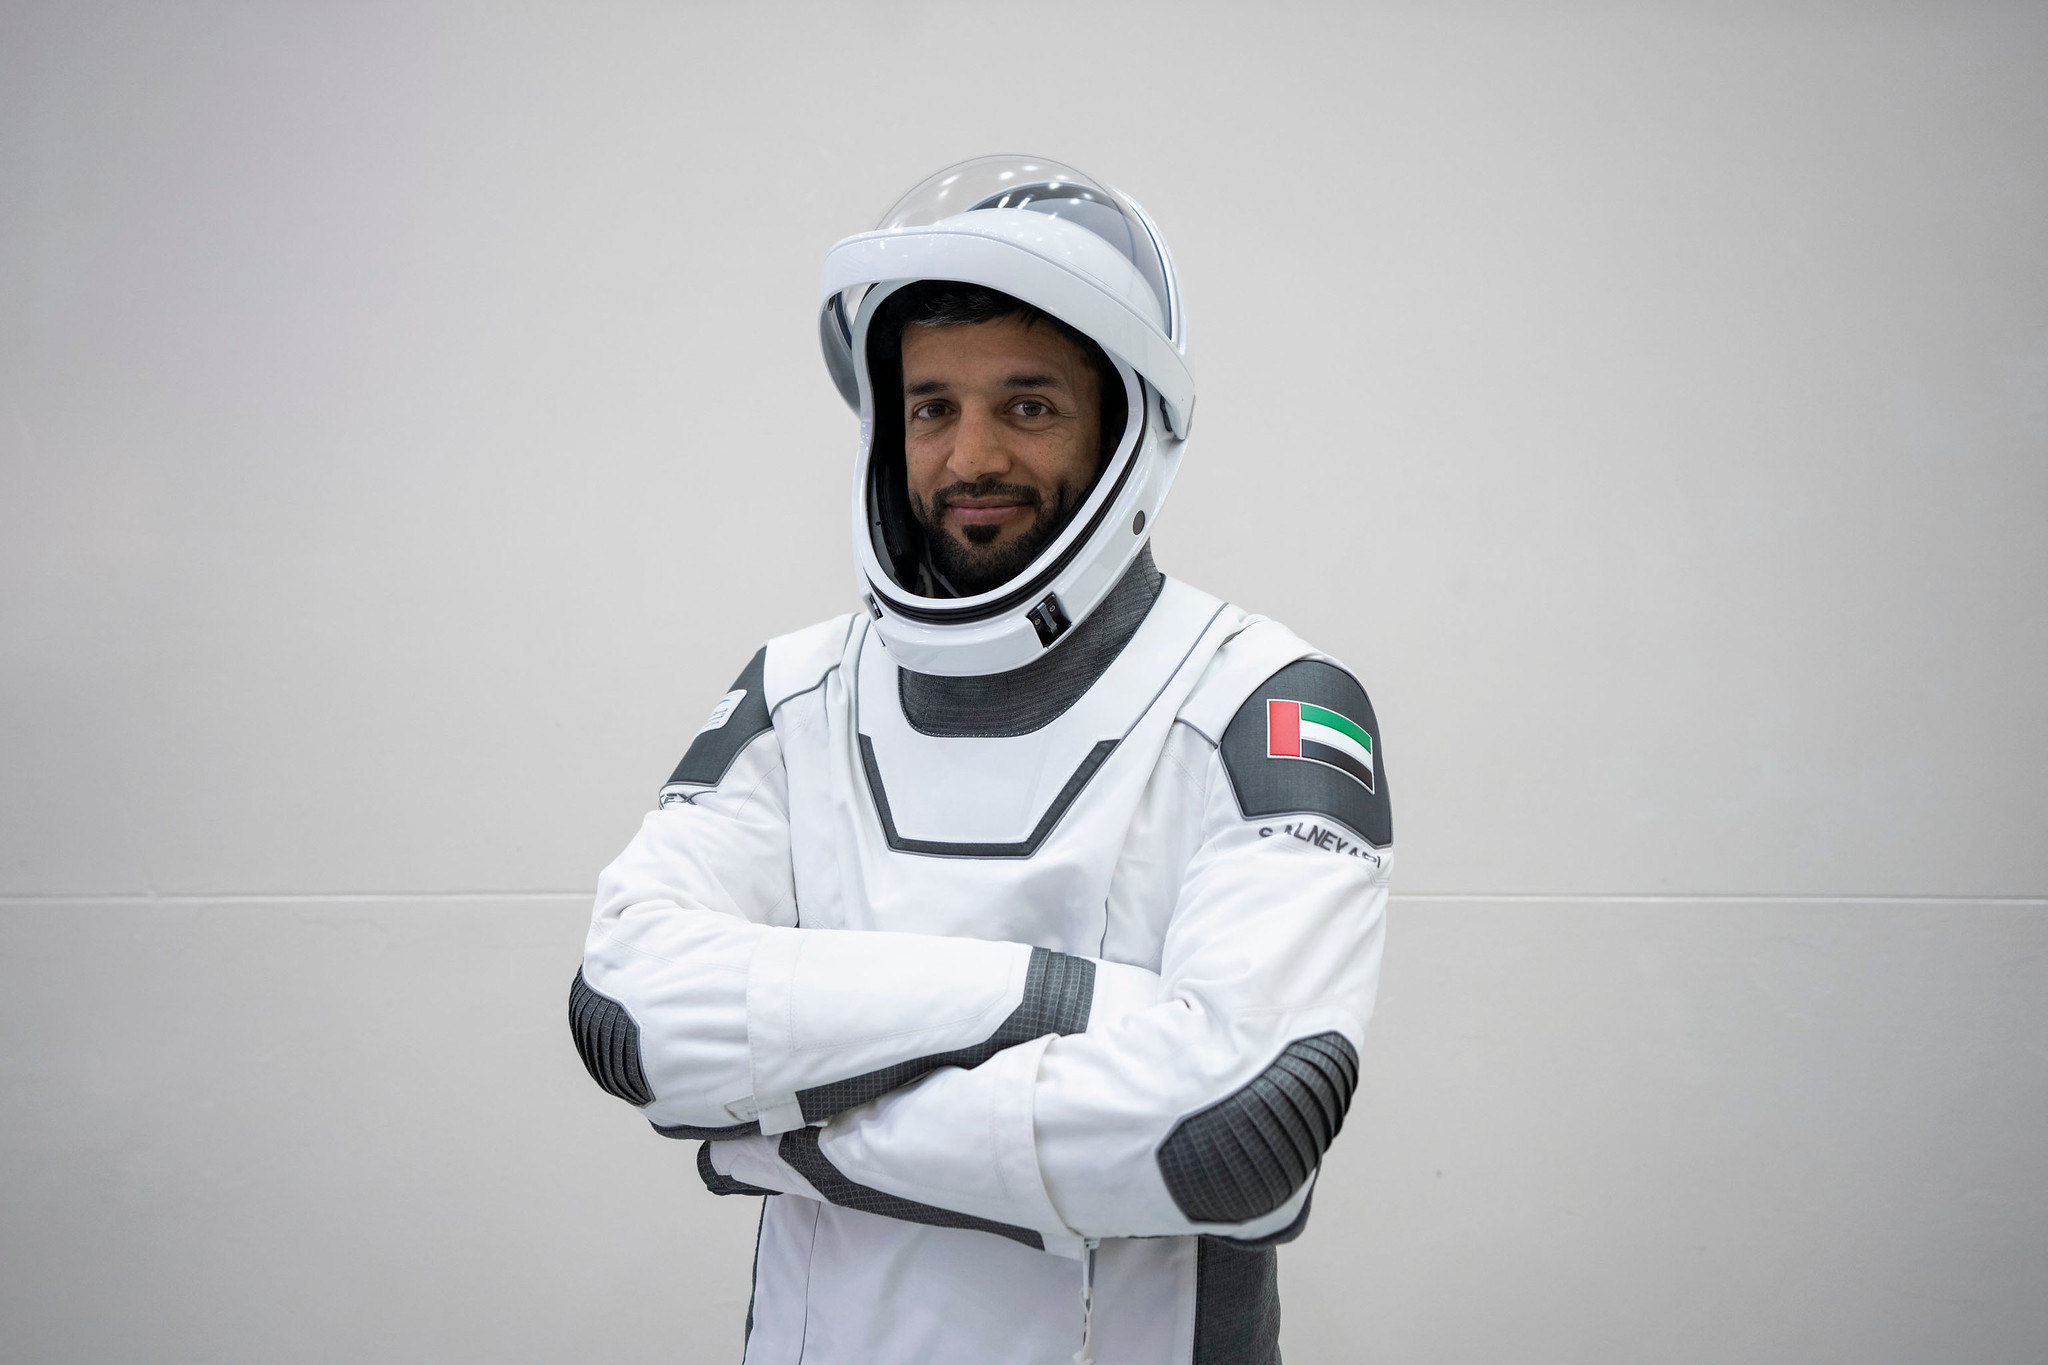 sultan al-neyadi stands in a spacesuit with arms folded